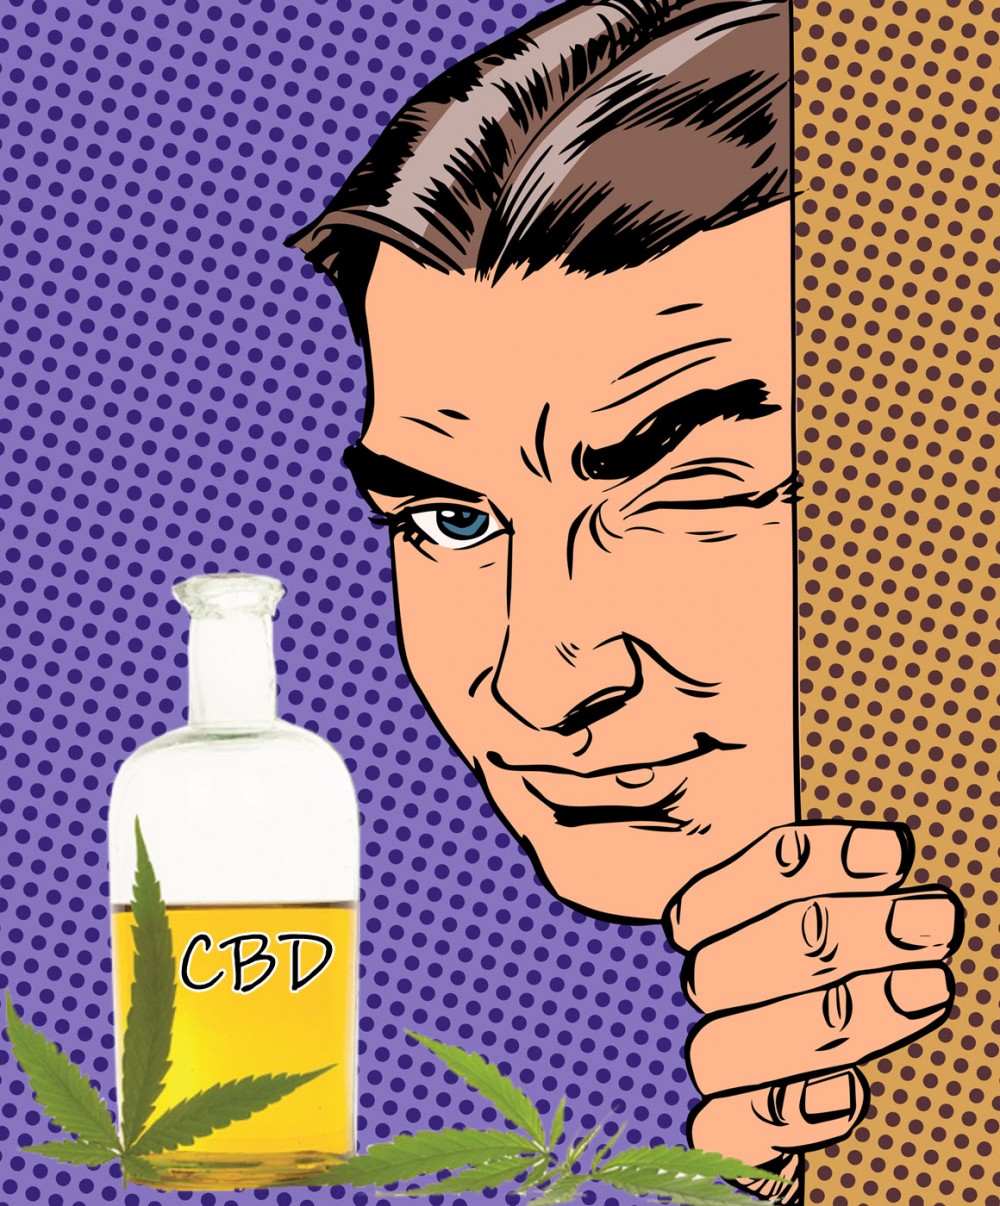 cbd oil uses you don't know about